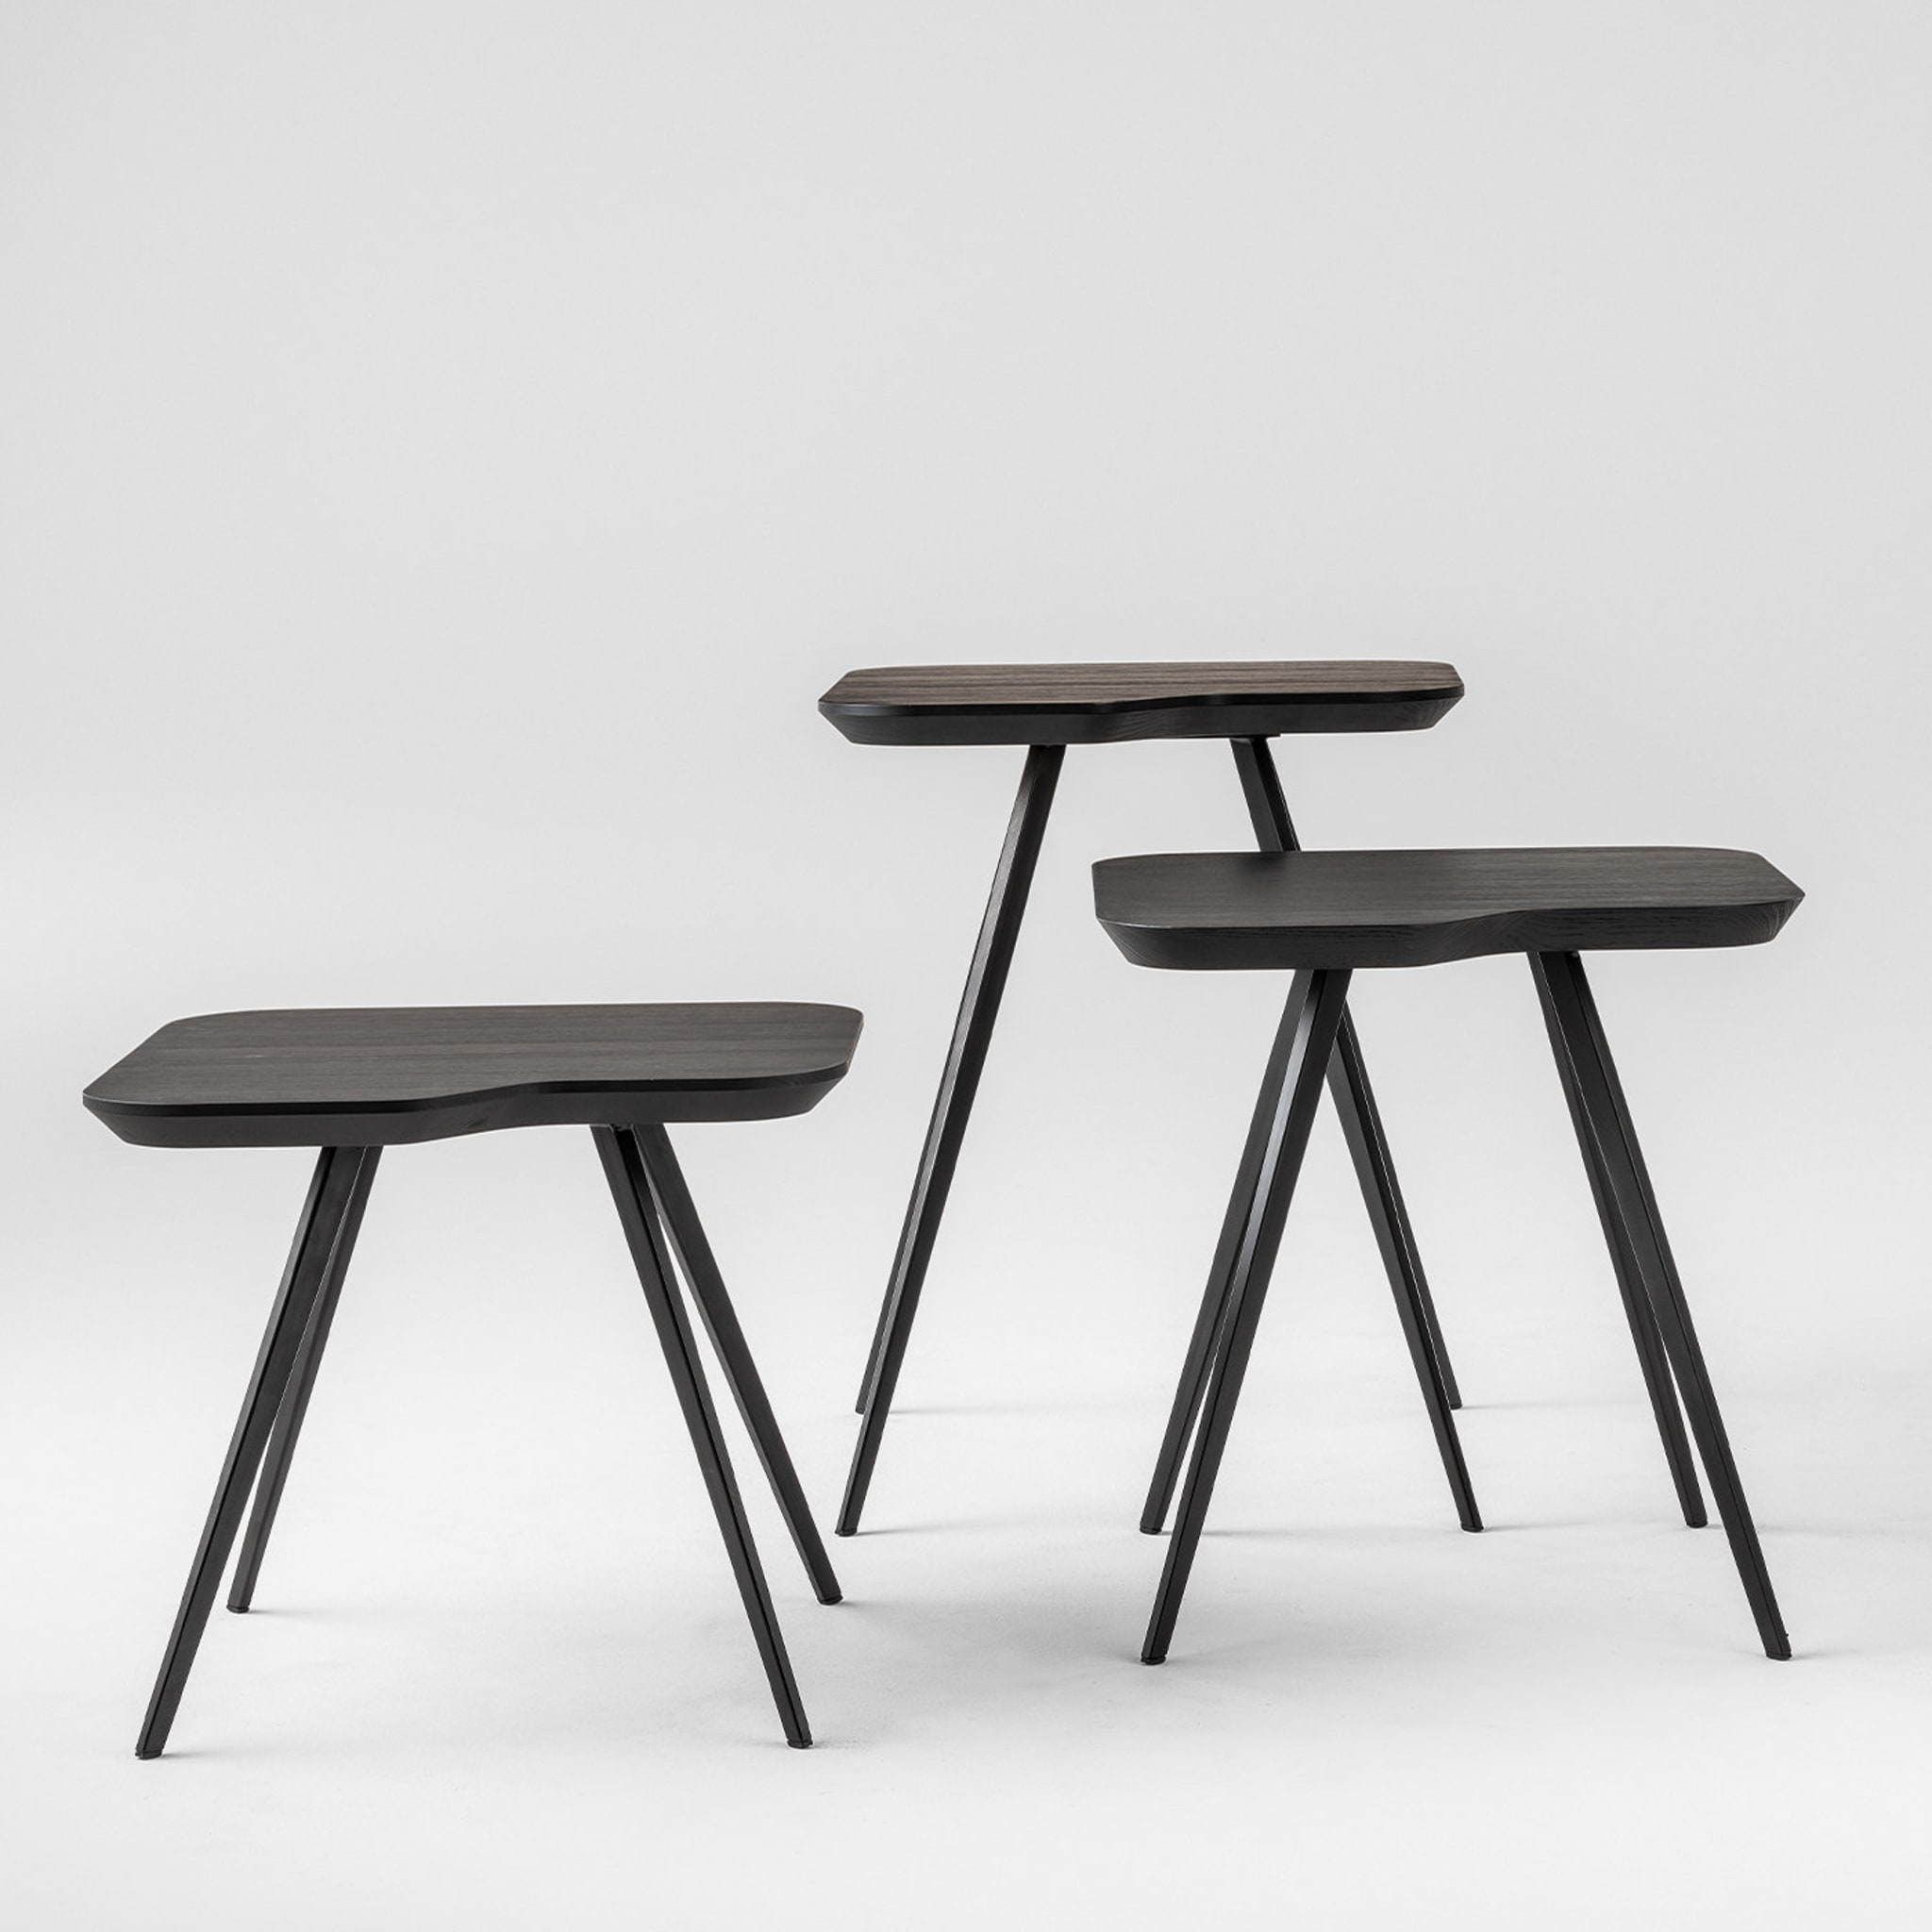 Aky Small Met Low Side Table by Emilio Nanni - Alternative view 1